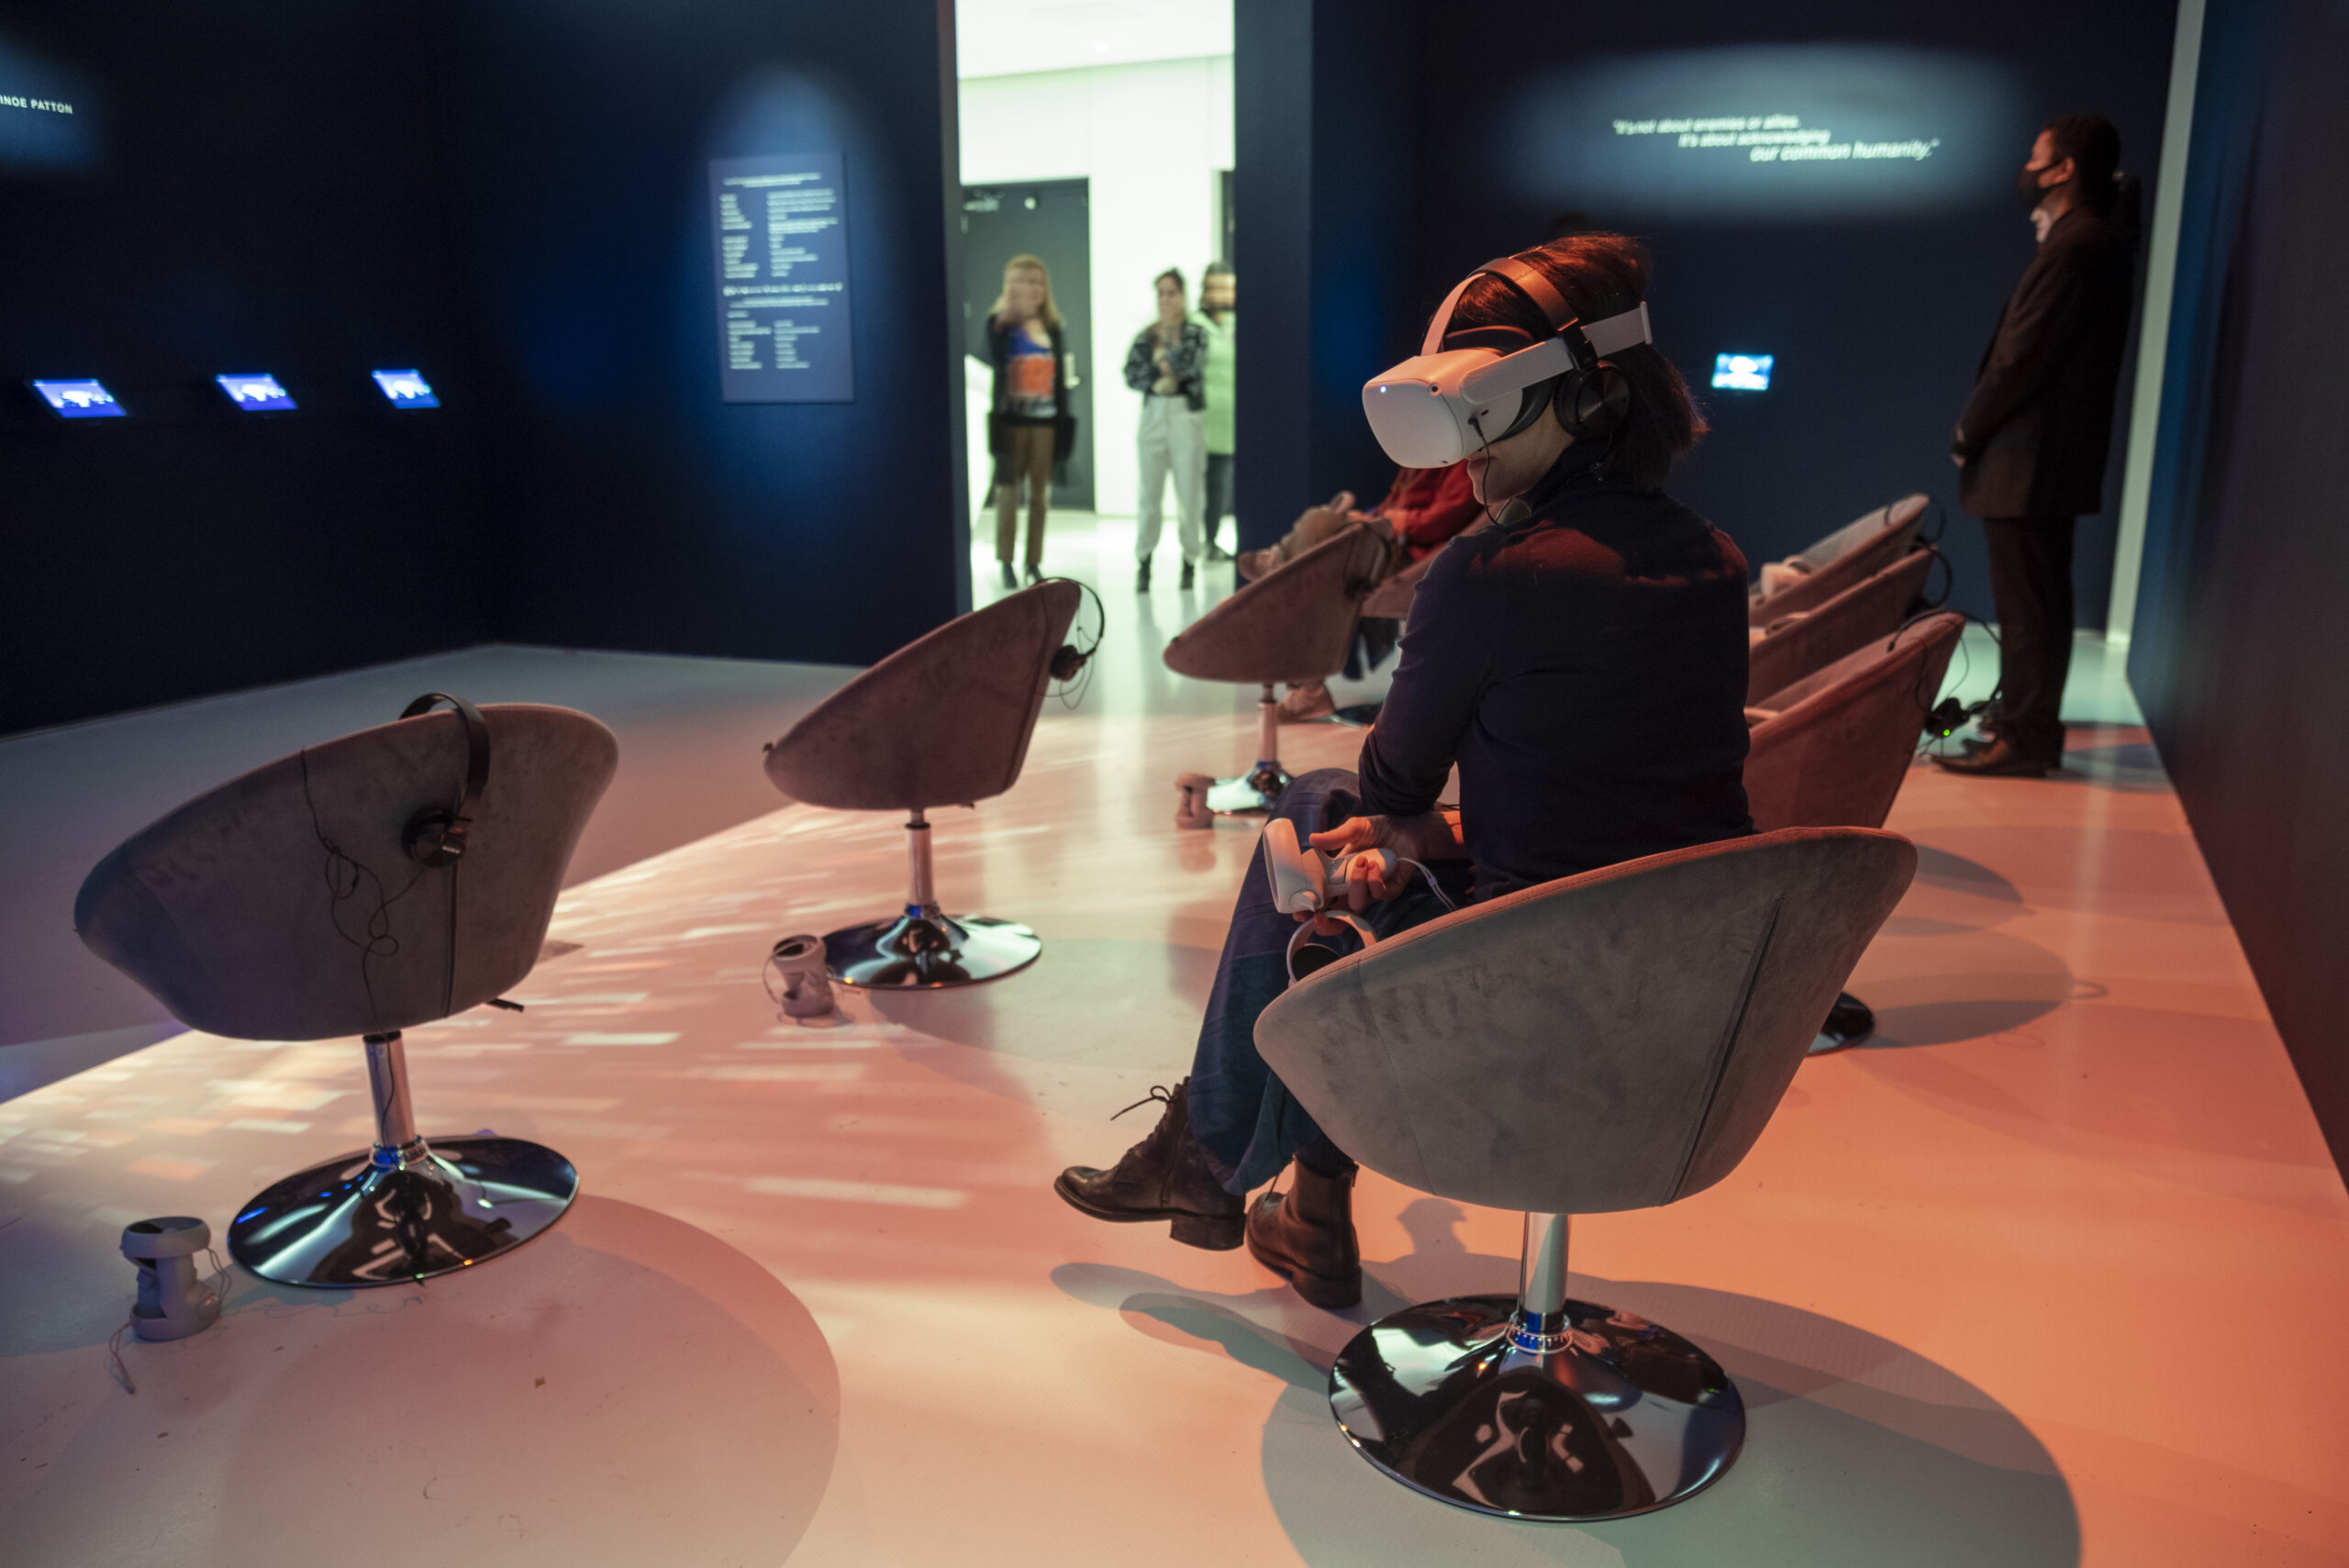 A museumgoer wears a VR headset at the On the Morning You Wake exhibit. Photo credit: Nate Dorr.